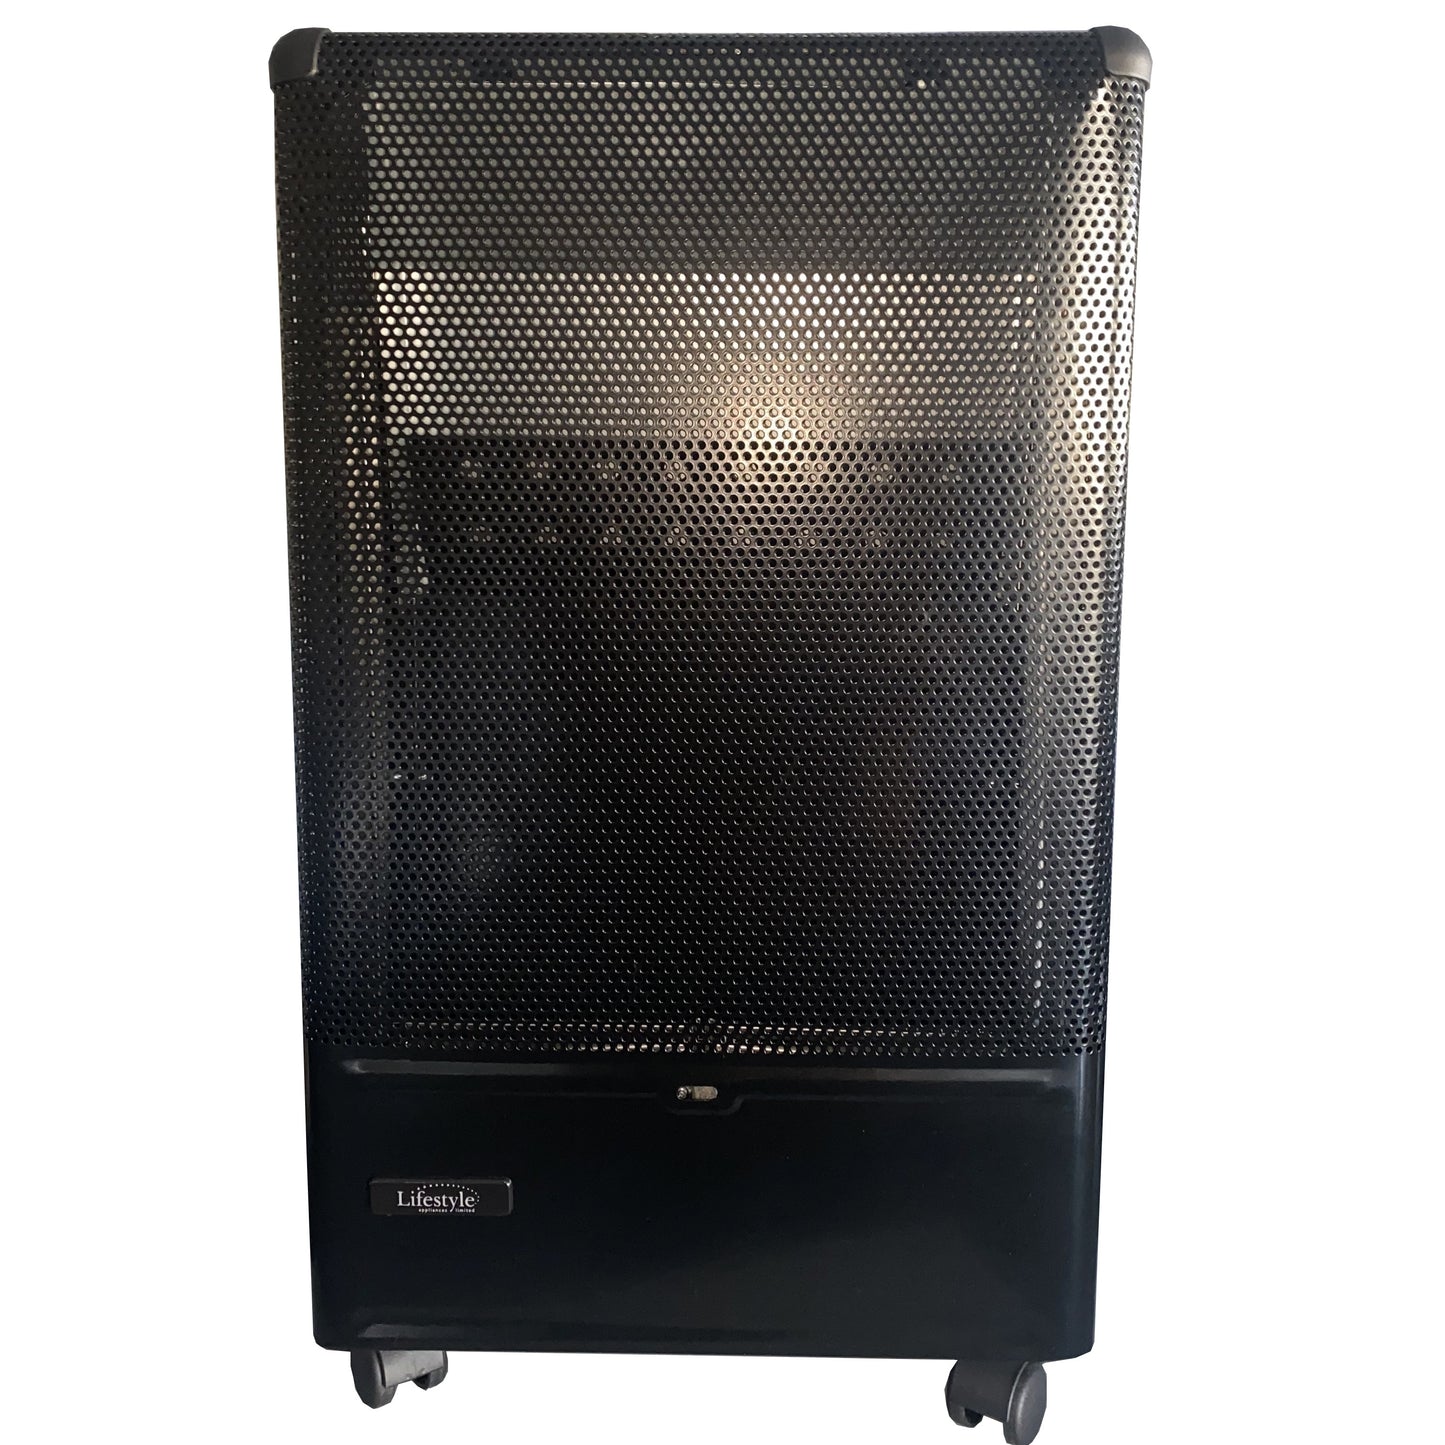 Lifestyle Blue Flame Indoor Heater